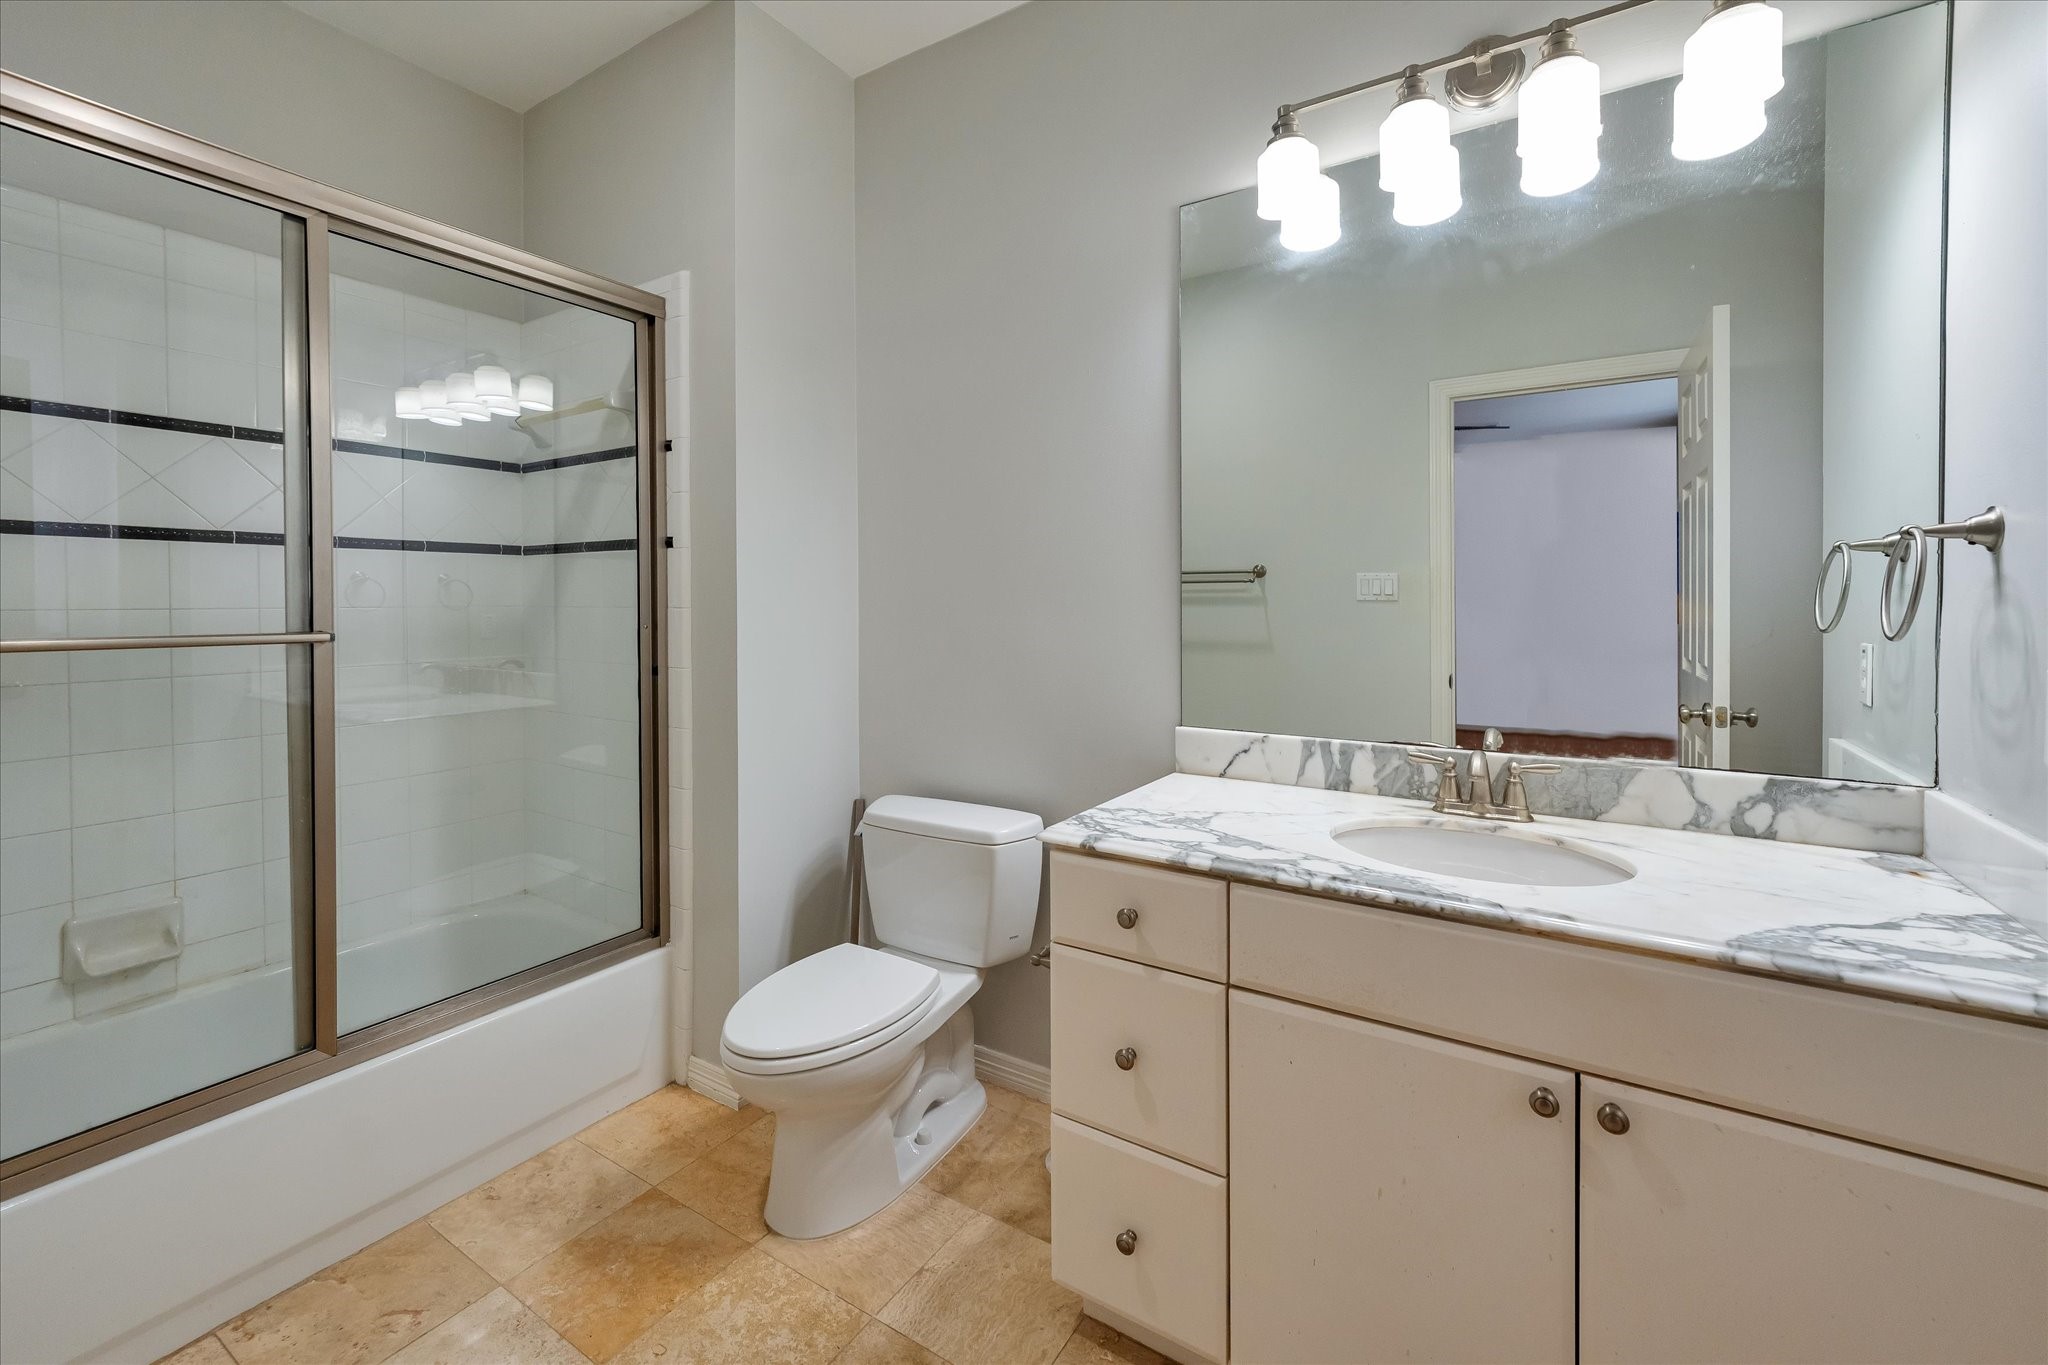 Enter your secondary en suite bath, fitted with tile flooring, an updated lighting fixture, a tub/shower combo equipped with a glass shower door, and a single vanity design.